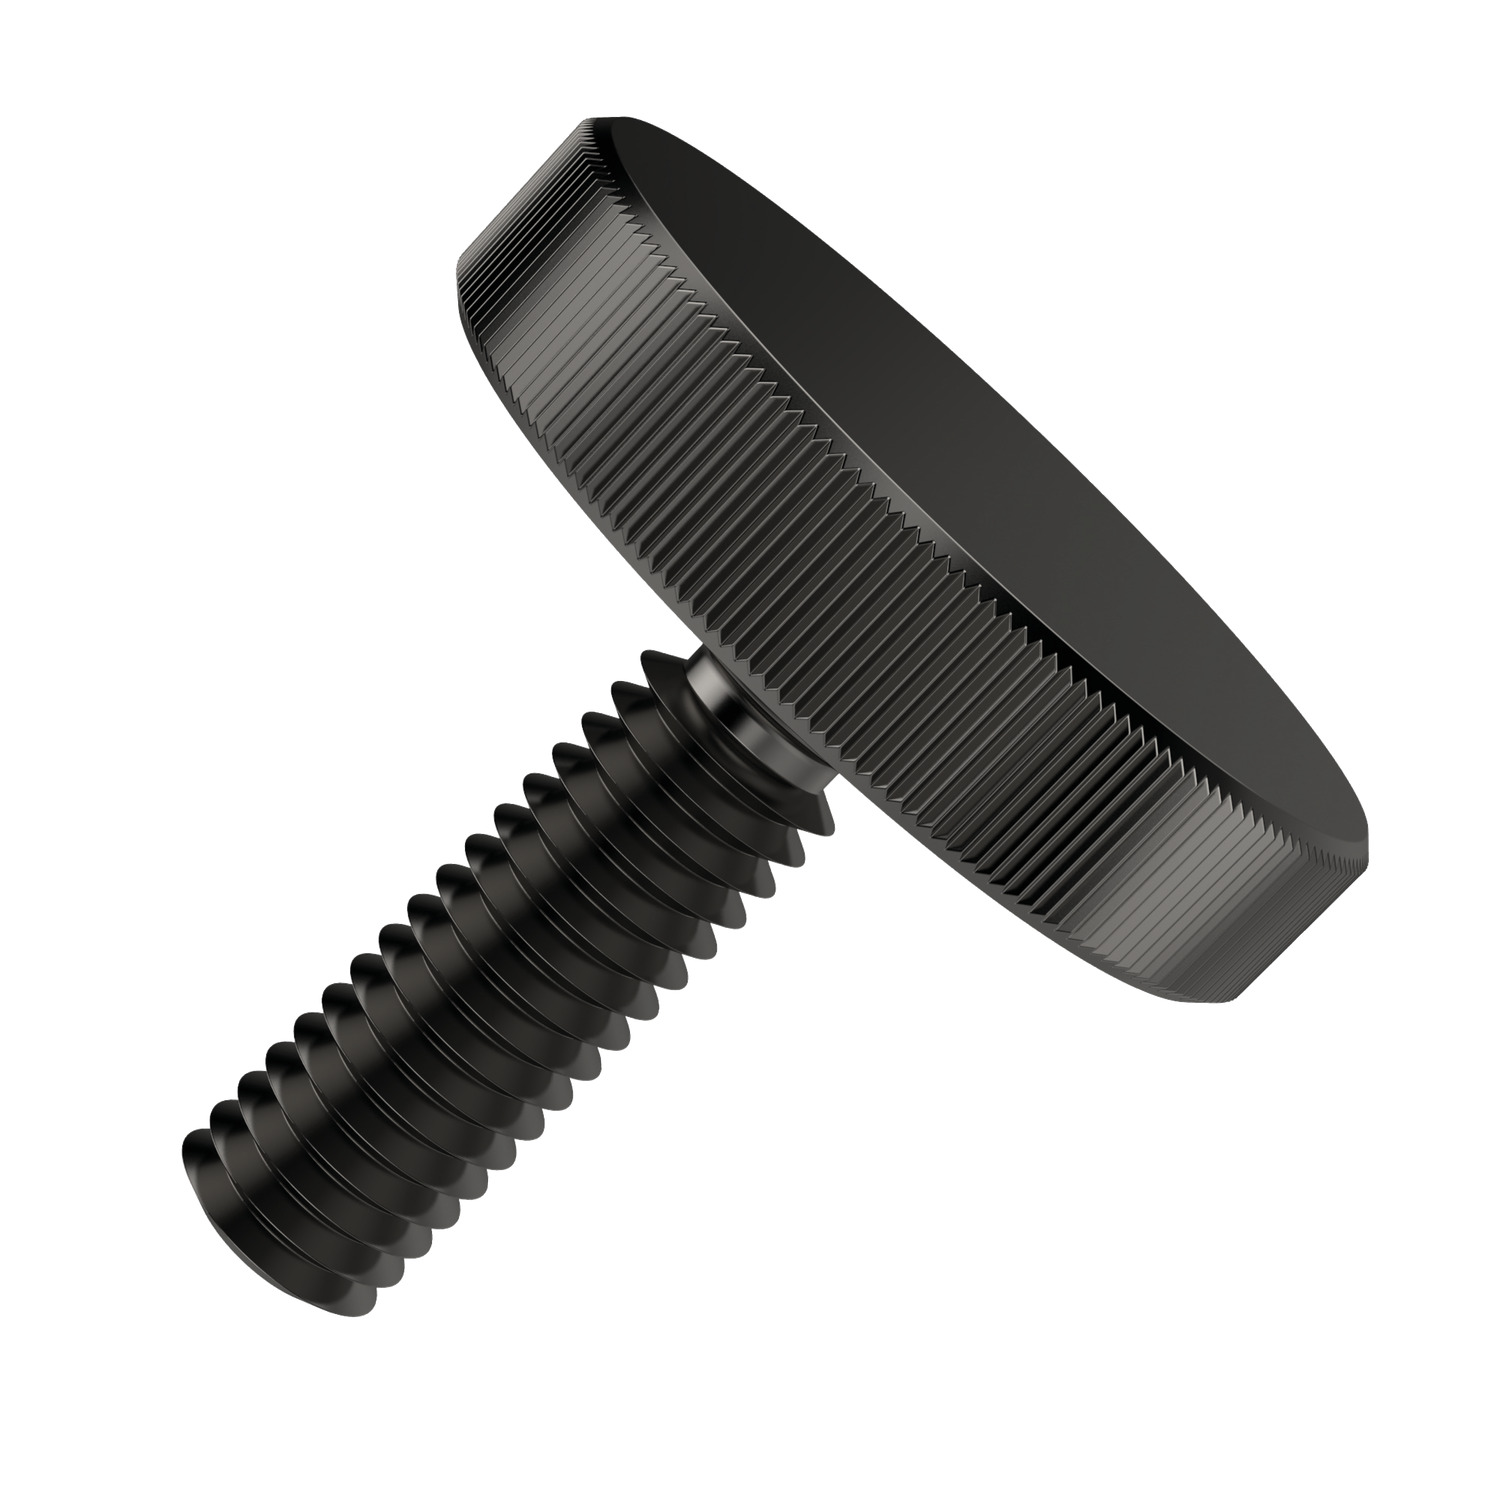 Flat Knurled Thumb Screws A flat knurled thumb screw made from blackened steel (5.8) to DIN 653 specification.